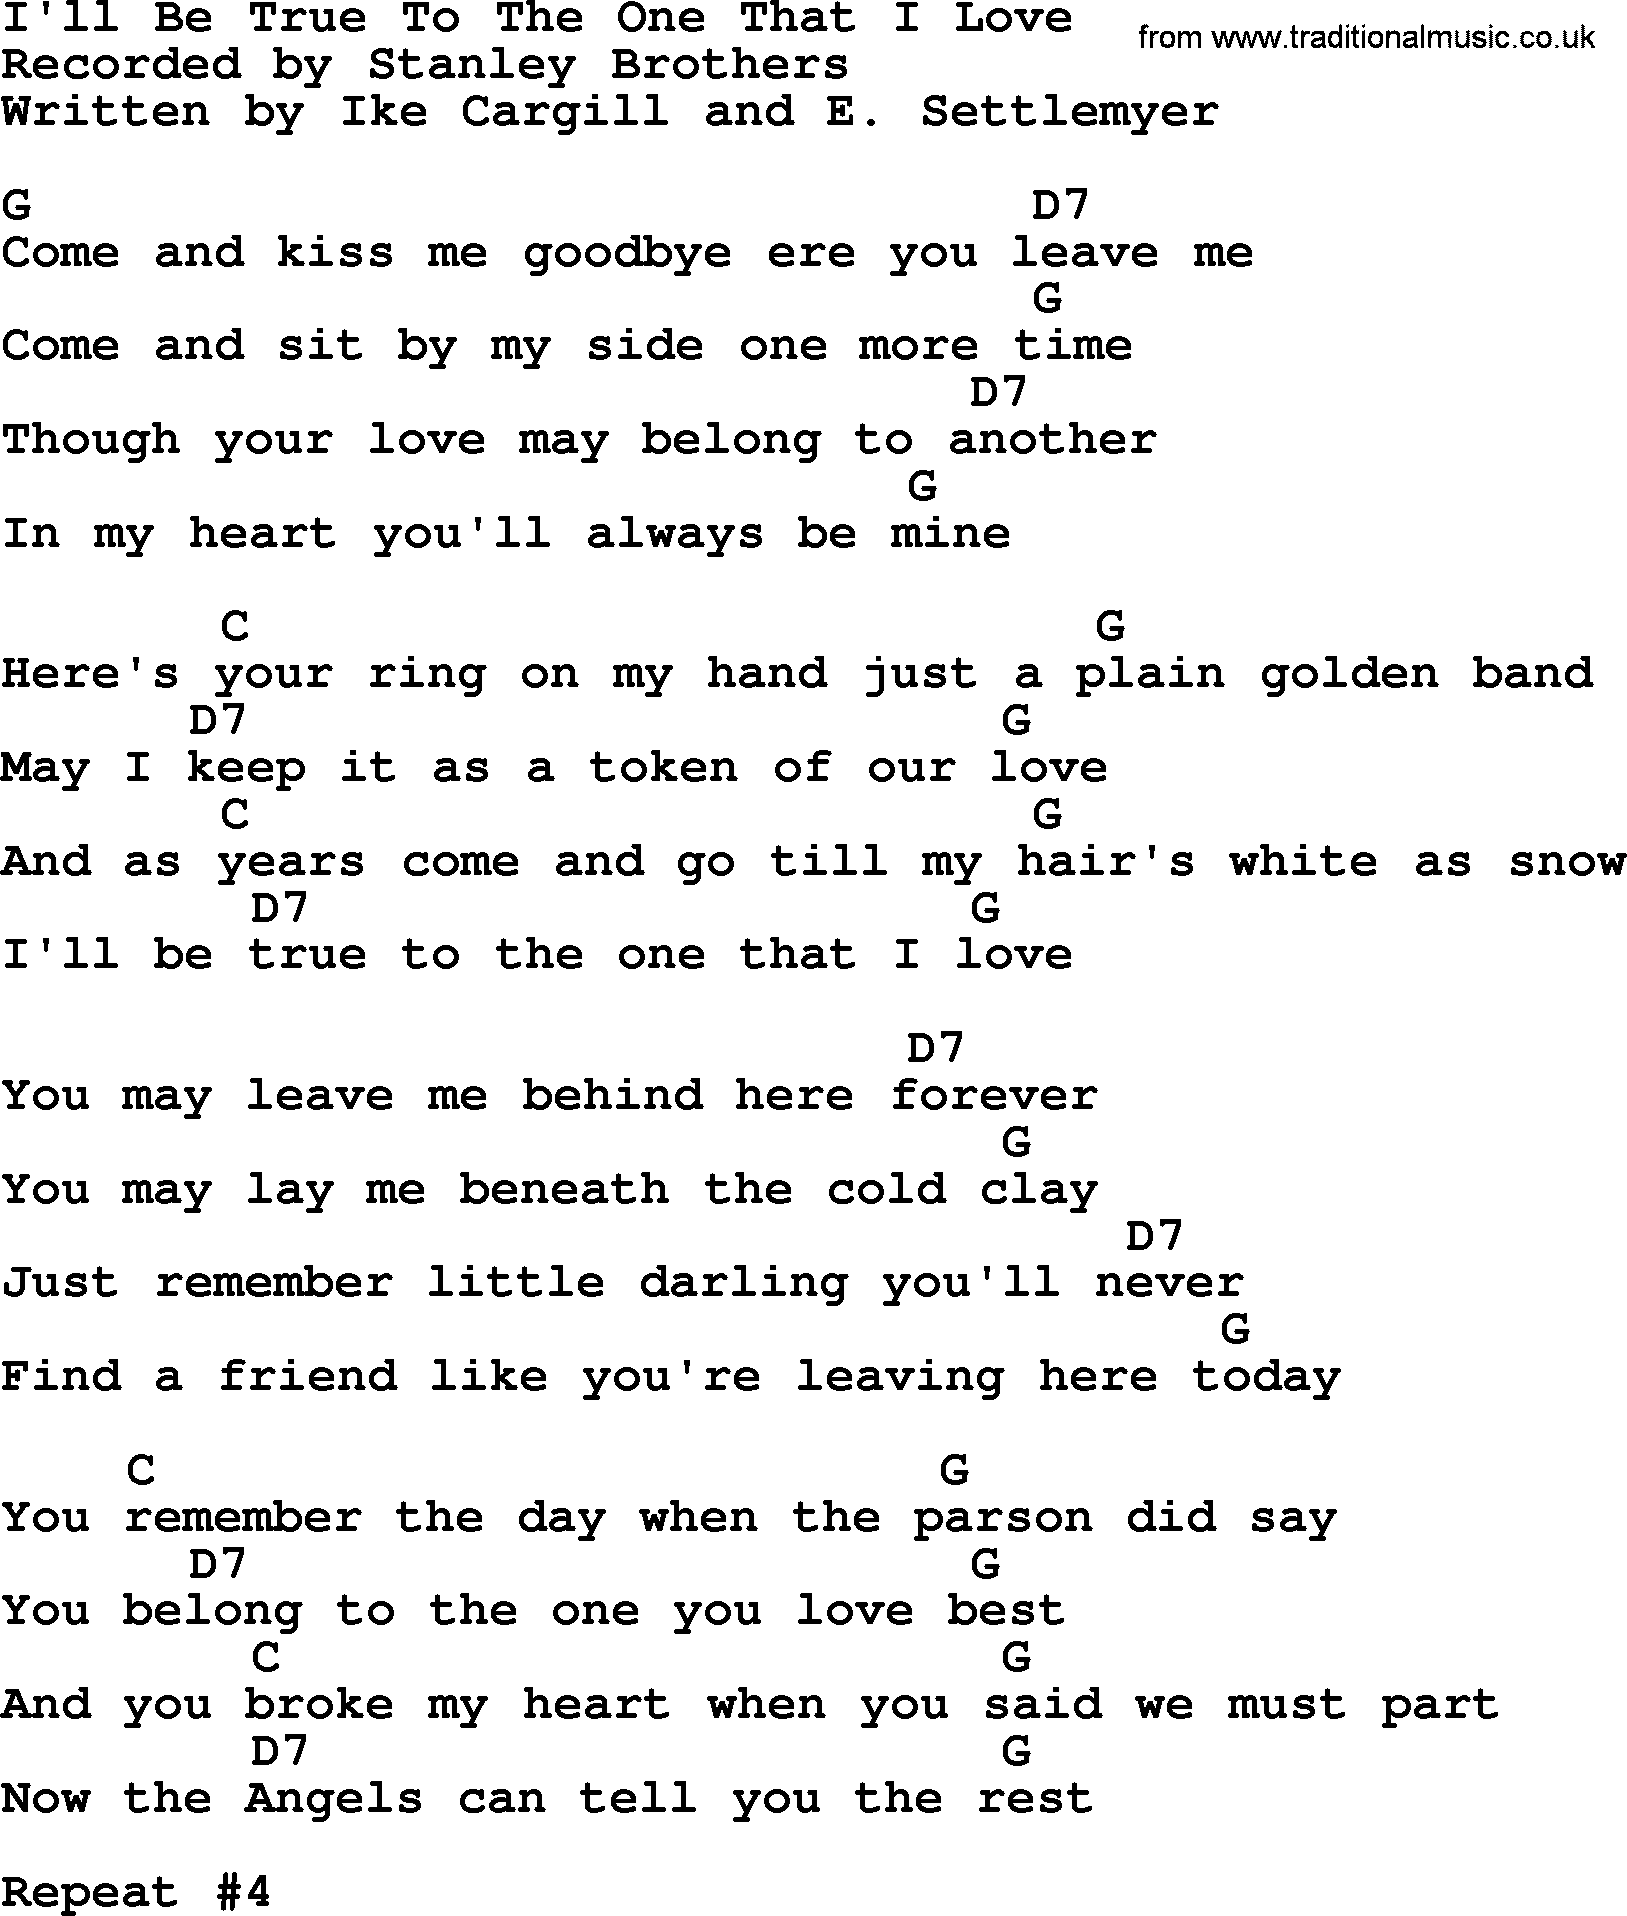 Bluegrass song: I'll Be True To The One That I Love, lyrics and chords